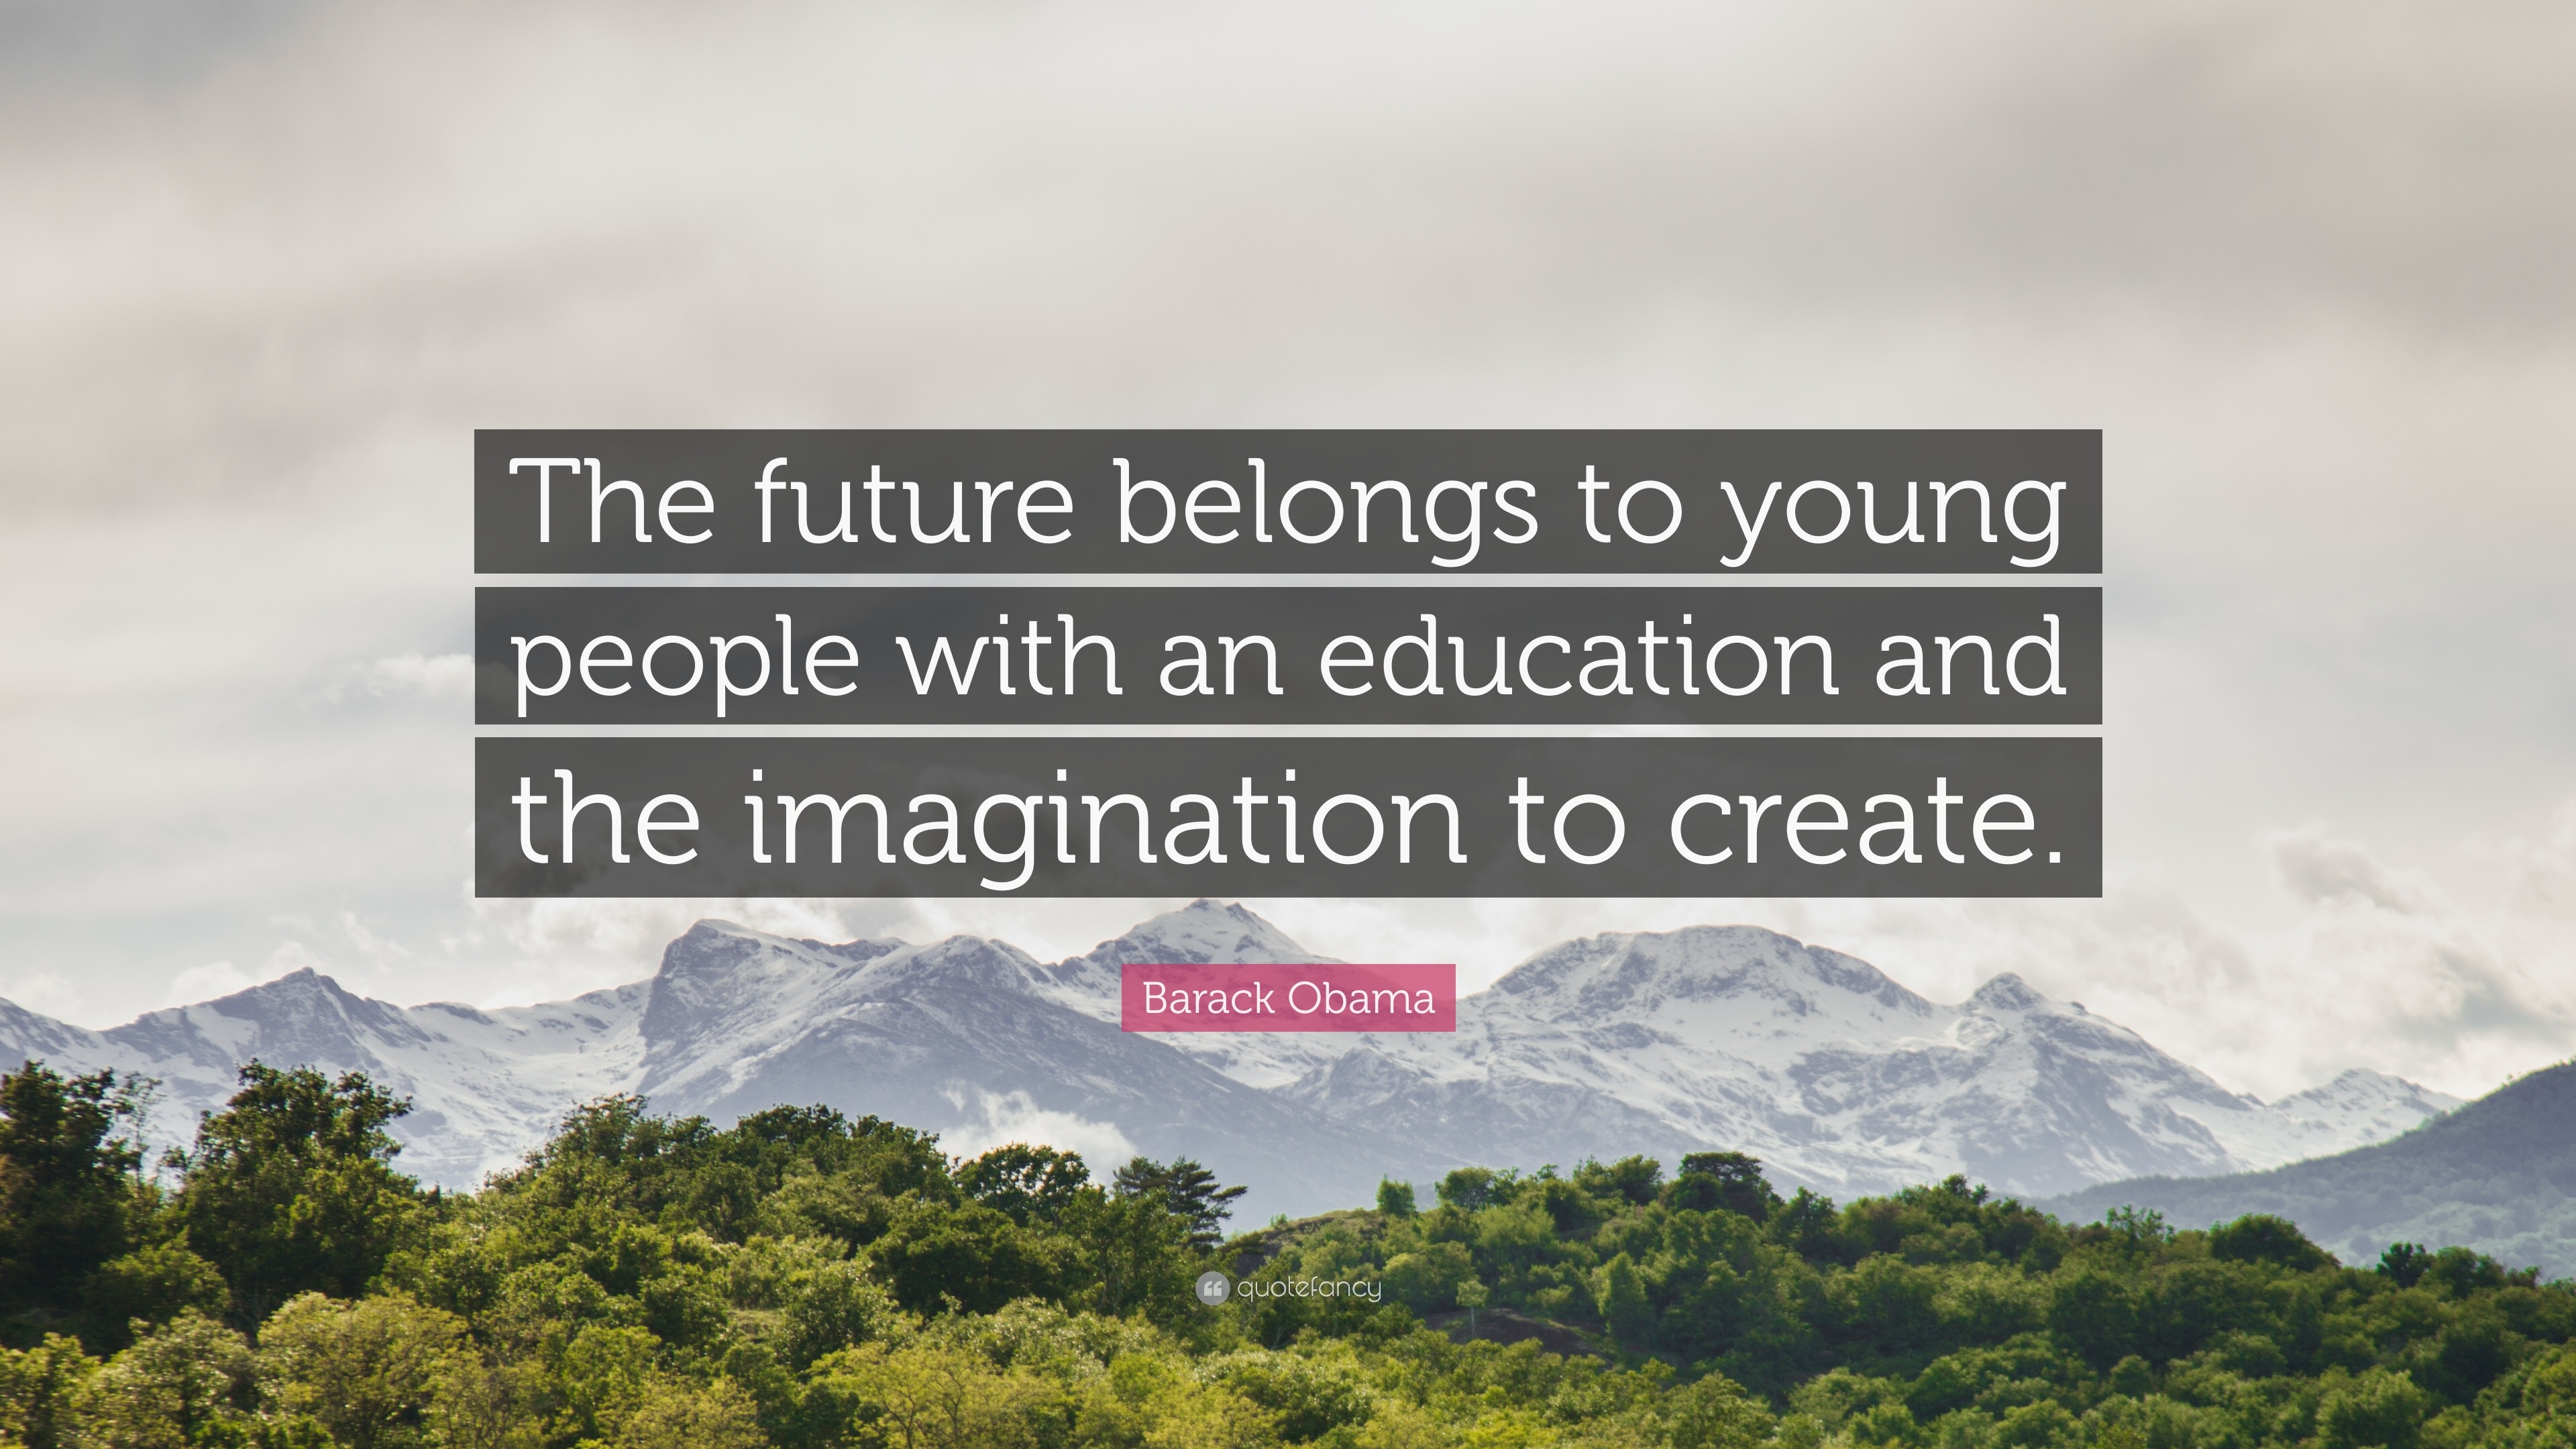 Barack Obama Quote The Future Belongs To Young People With An Education And The Imagination To Create 12 Wallpapers Quotefancy